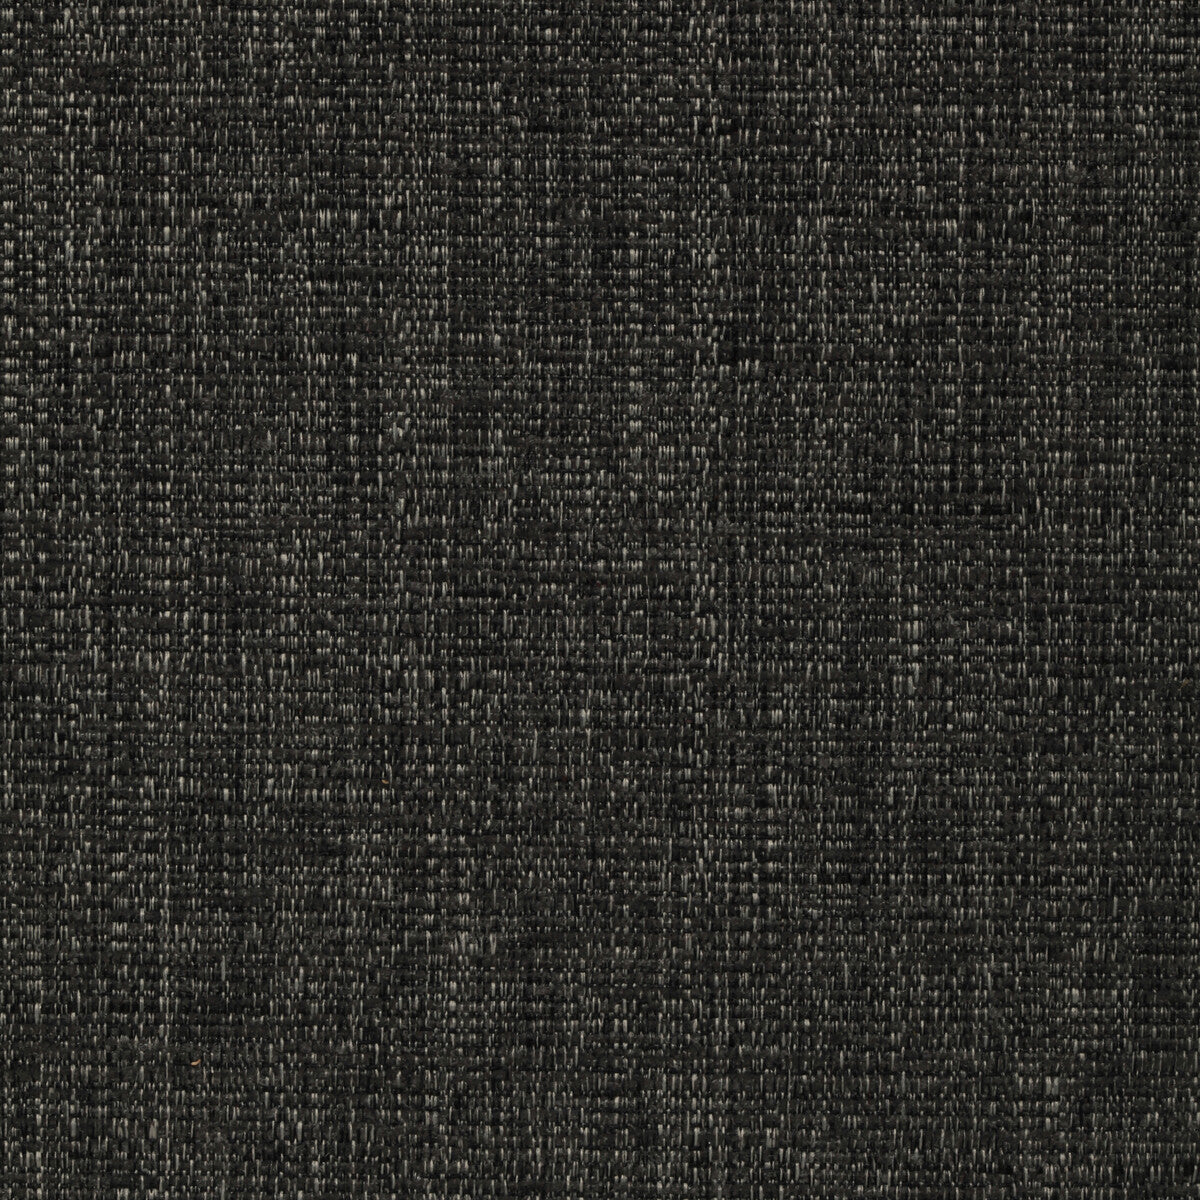 Kravet Contract fabric in 35128-81 color - pattern 35128.81.0 - by Kravet Contract in the Crypton Incase collection